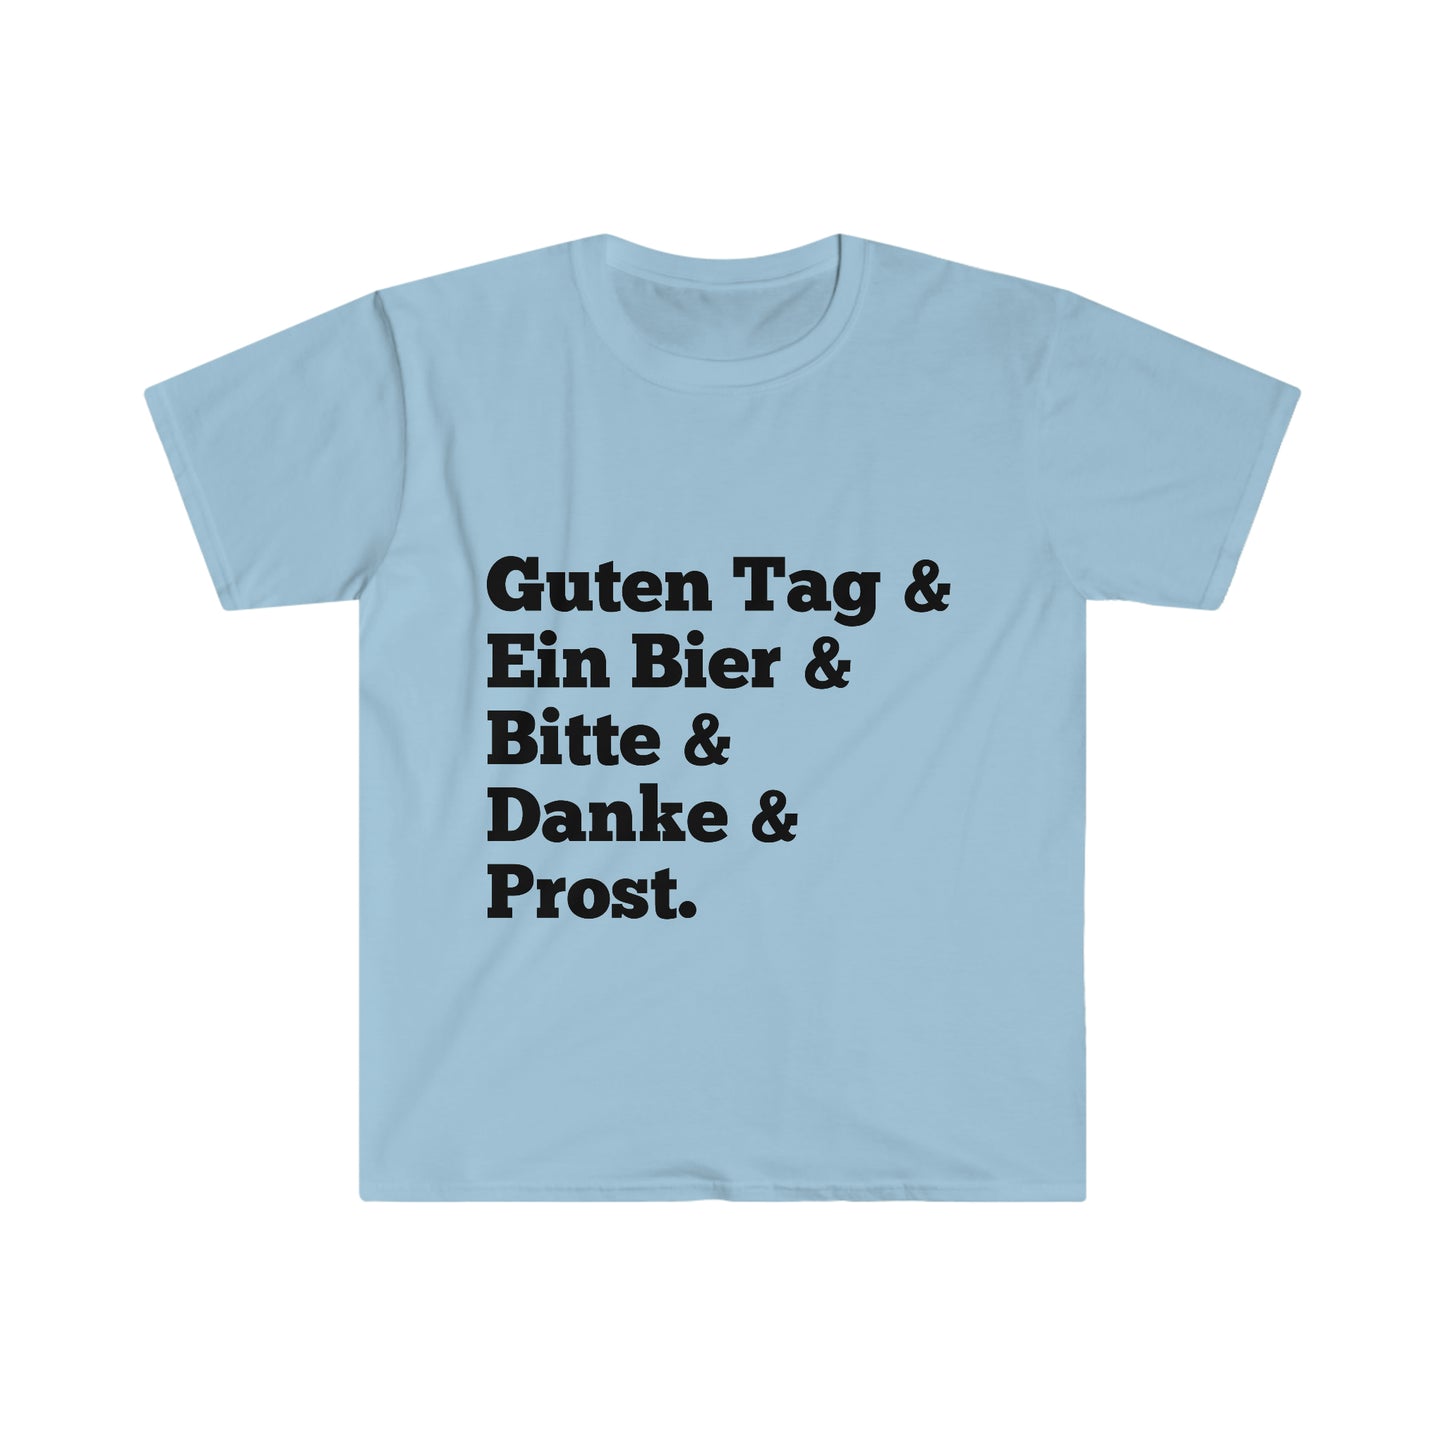 Deutschland Travel T-Shirt Show Your Love for Germany with this Great Tee!